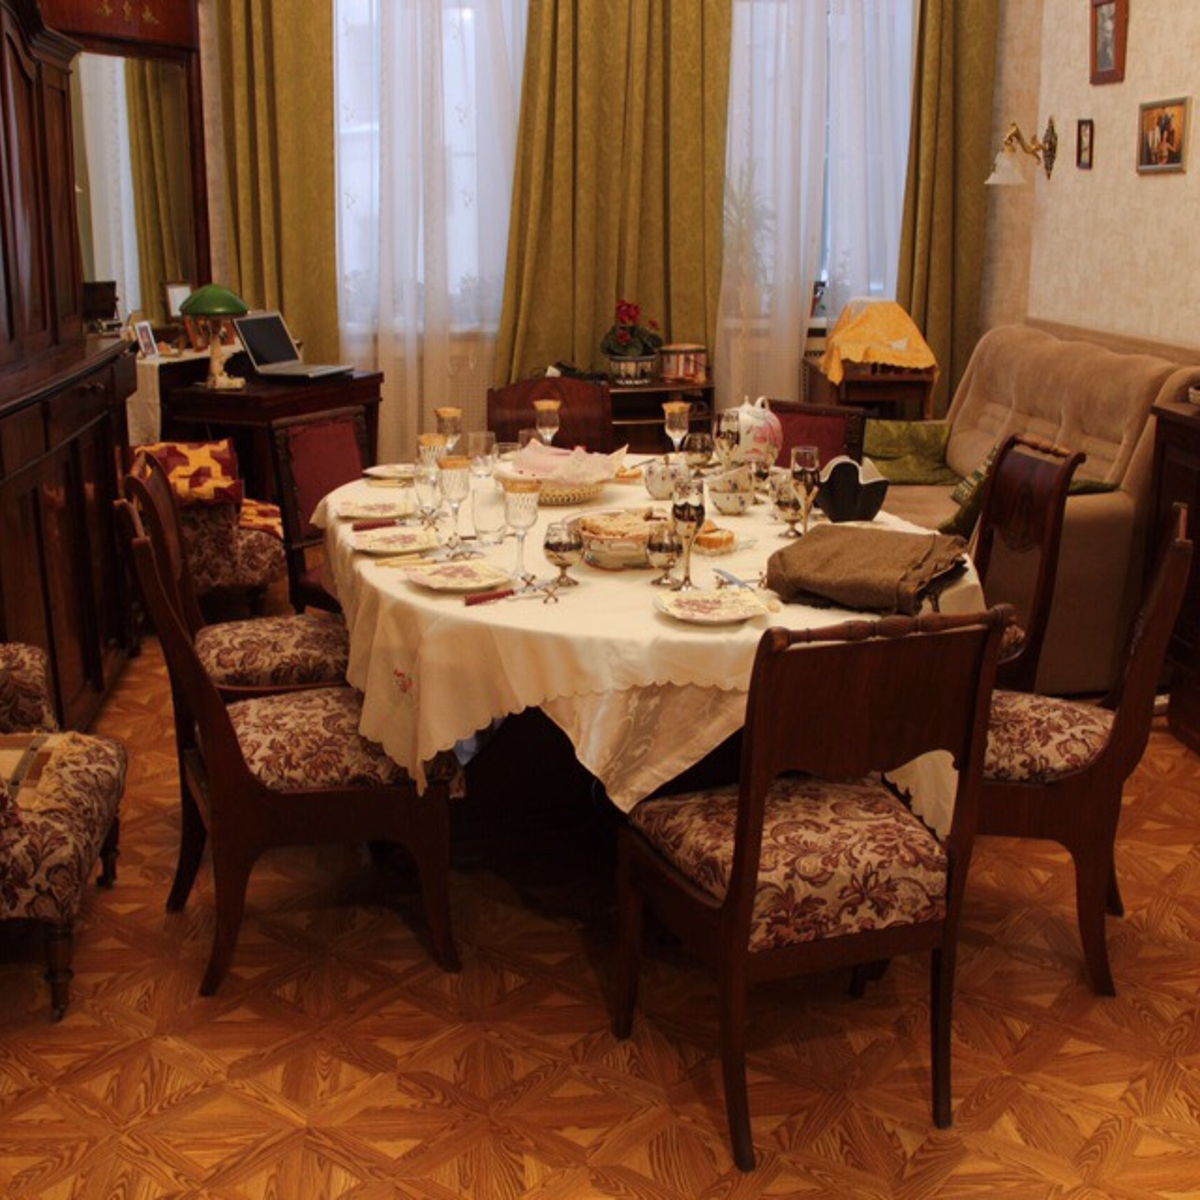 Russian dinner in a traditional St. Petersburg apartment